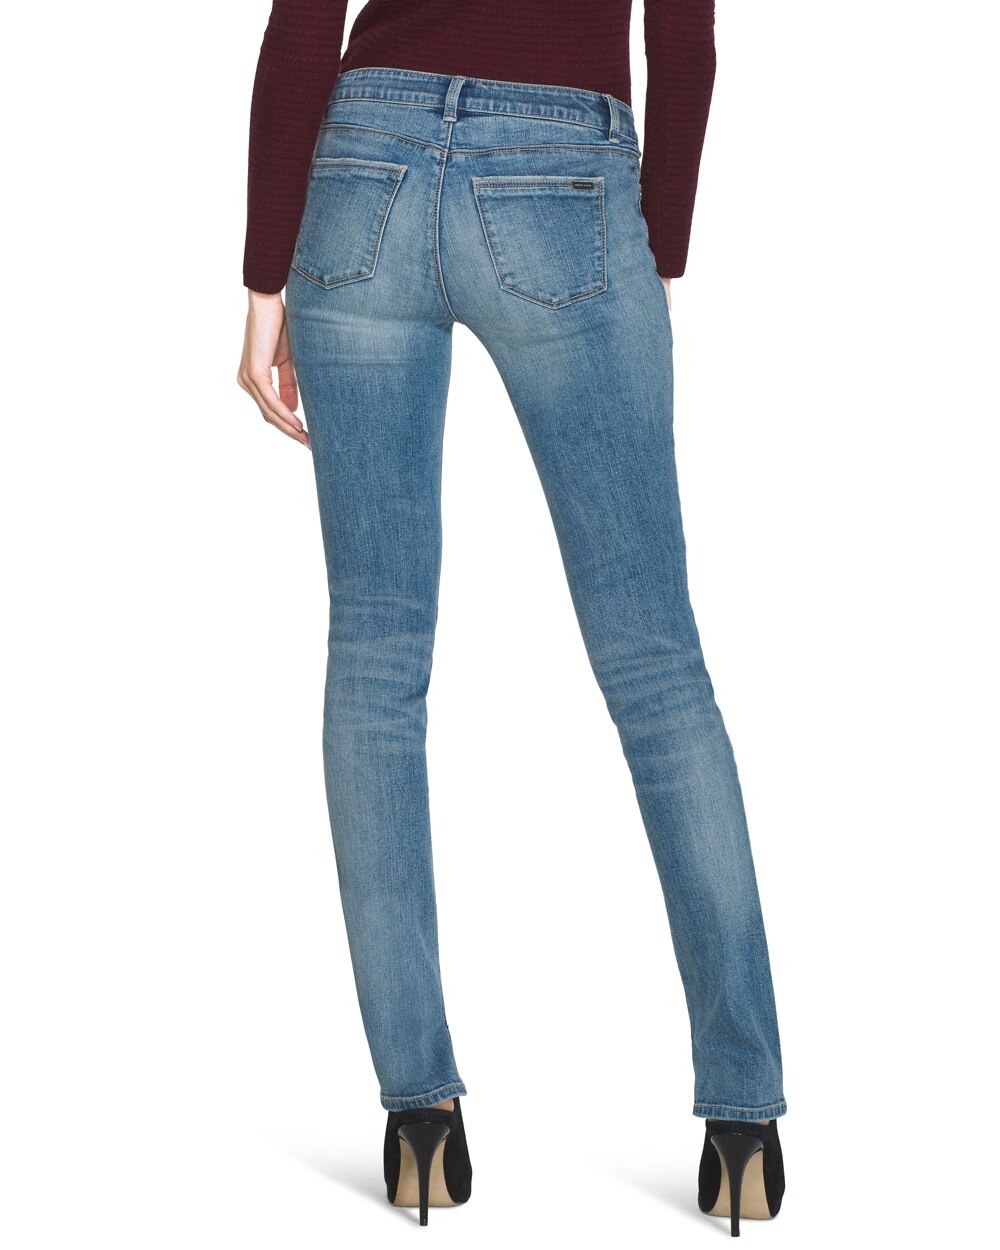 Slim Jeans - Shop Jeans and Pants for Women - Petite, Skinny Jeans ...